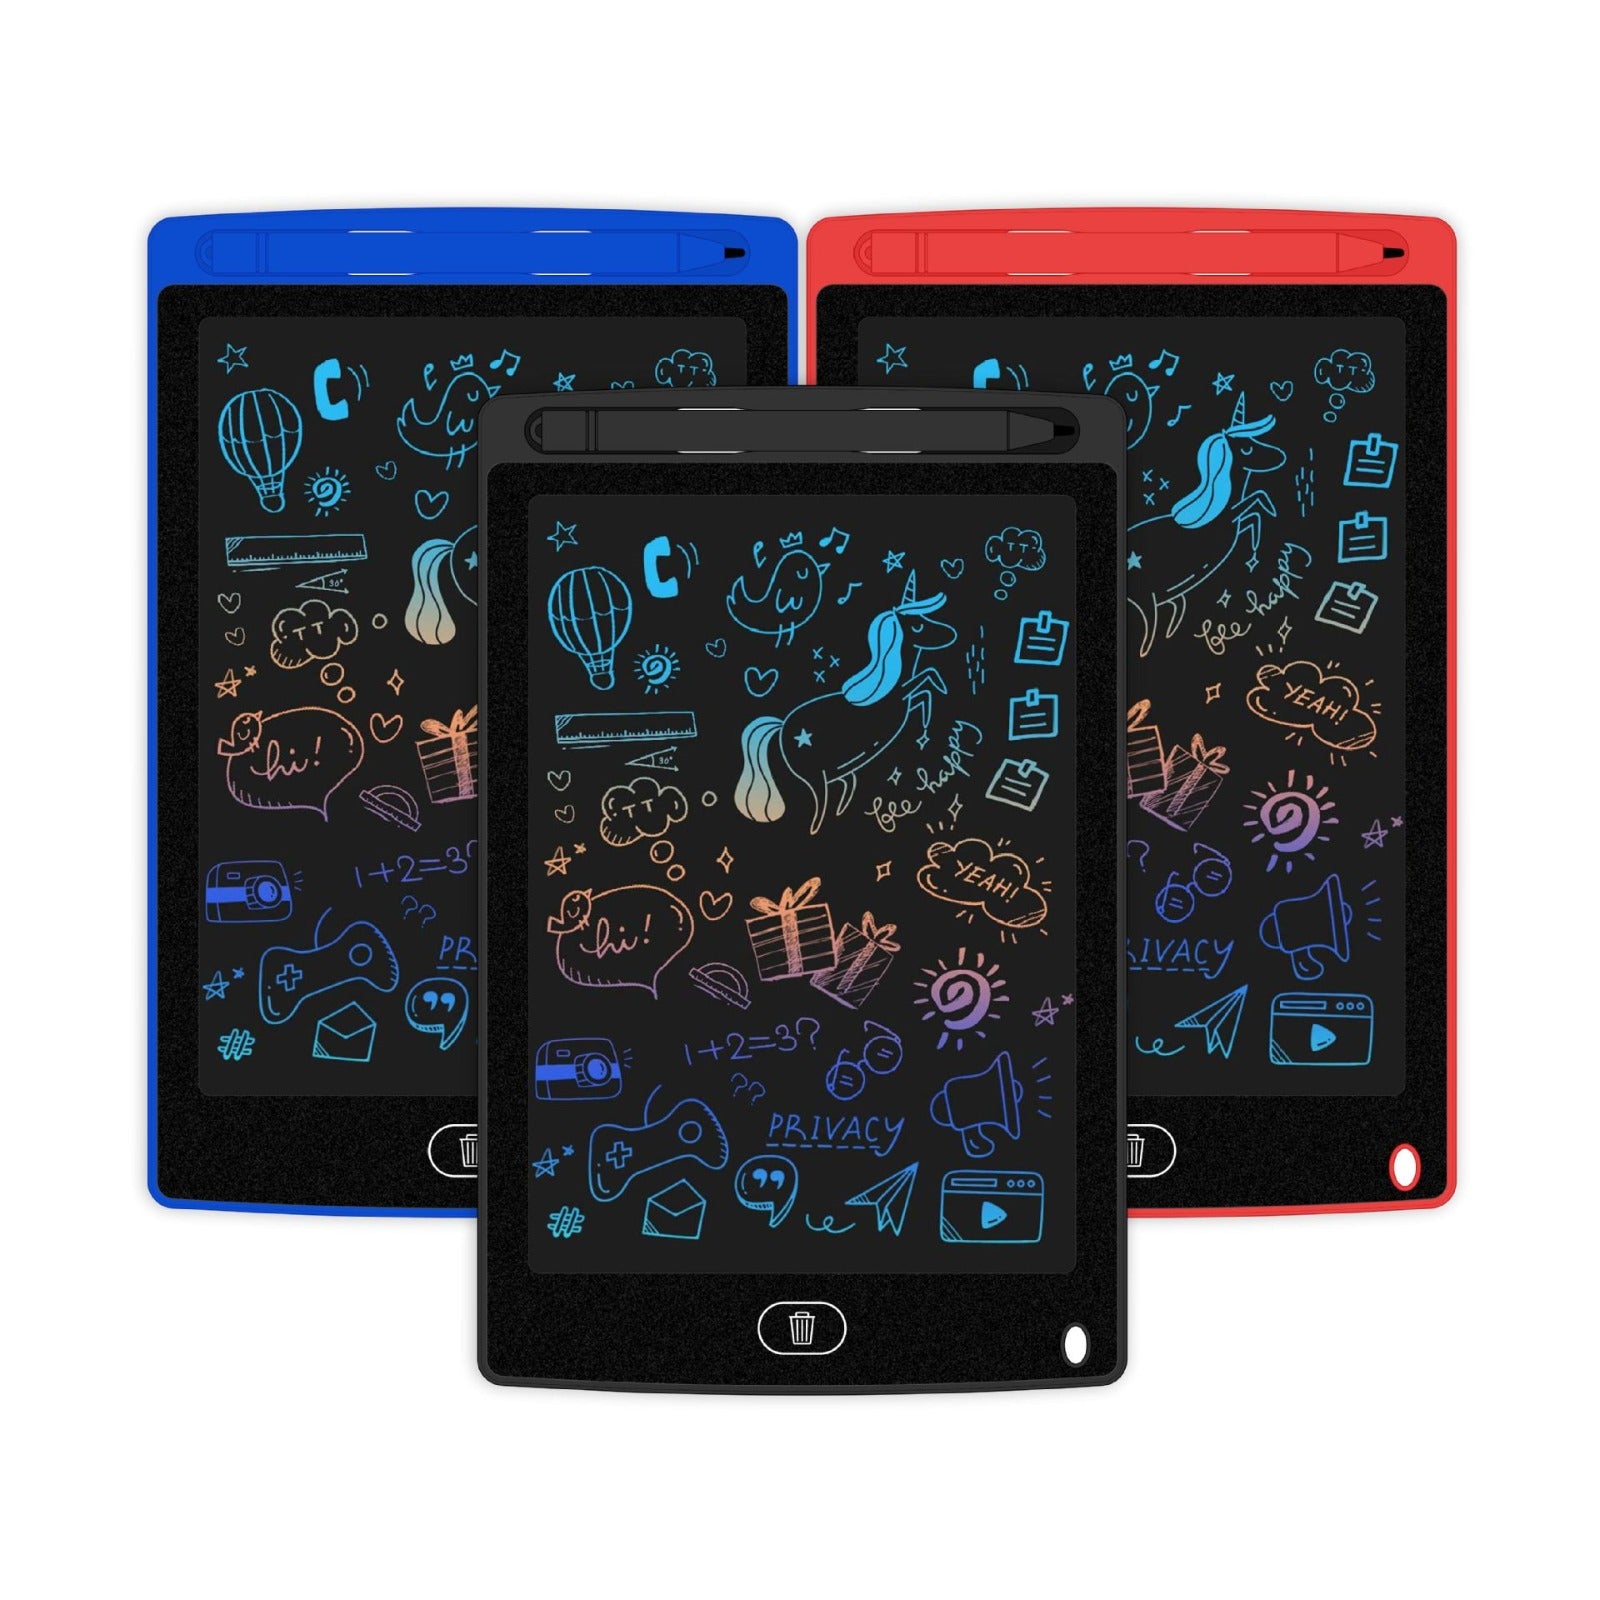 Toddlers Tablet – Perfect for drawing, writing, counting, and more!